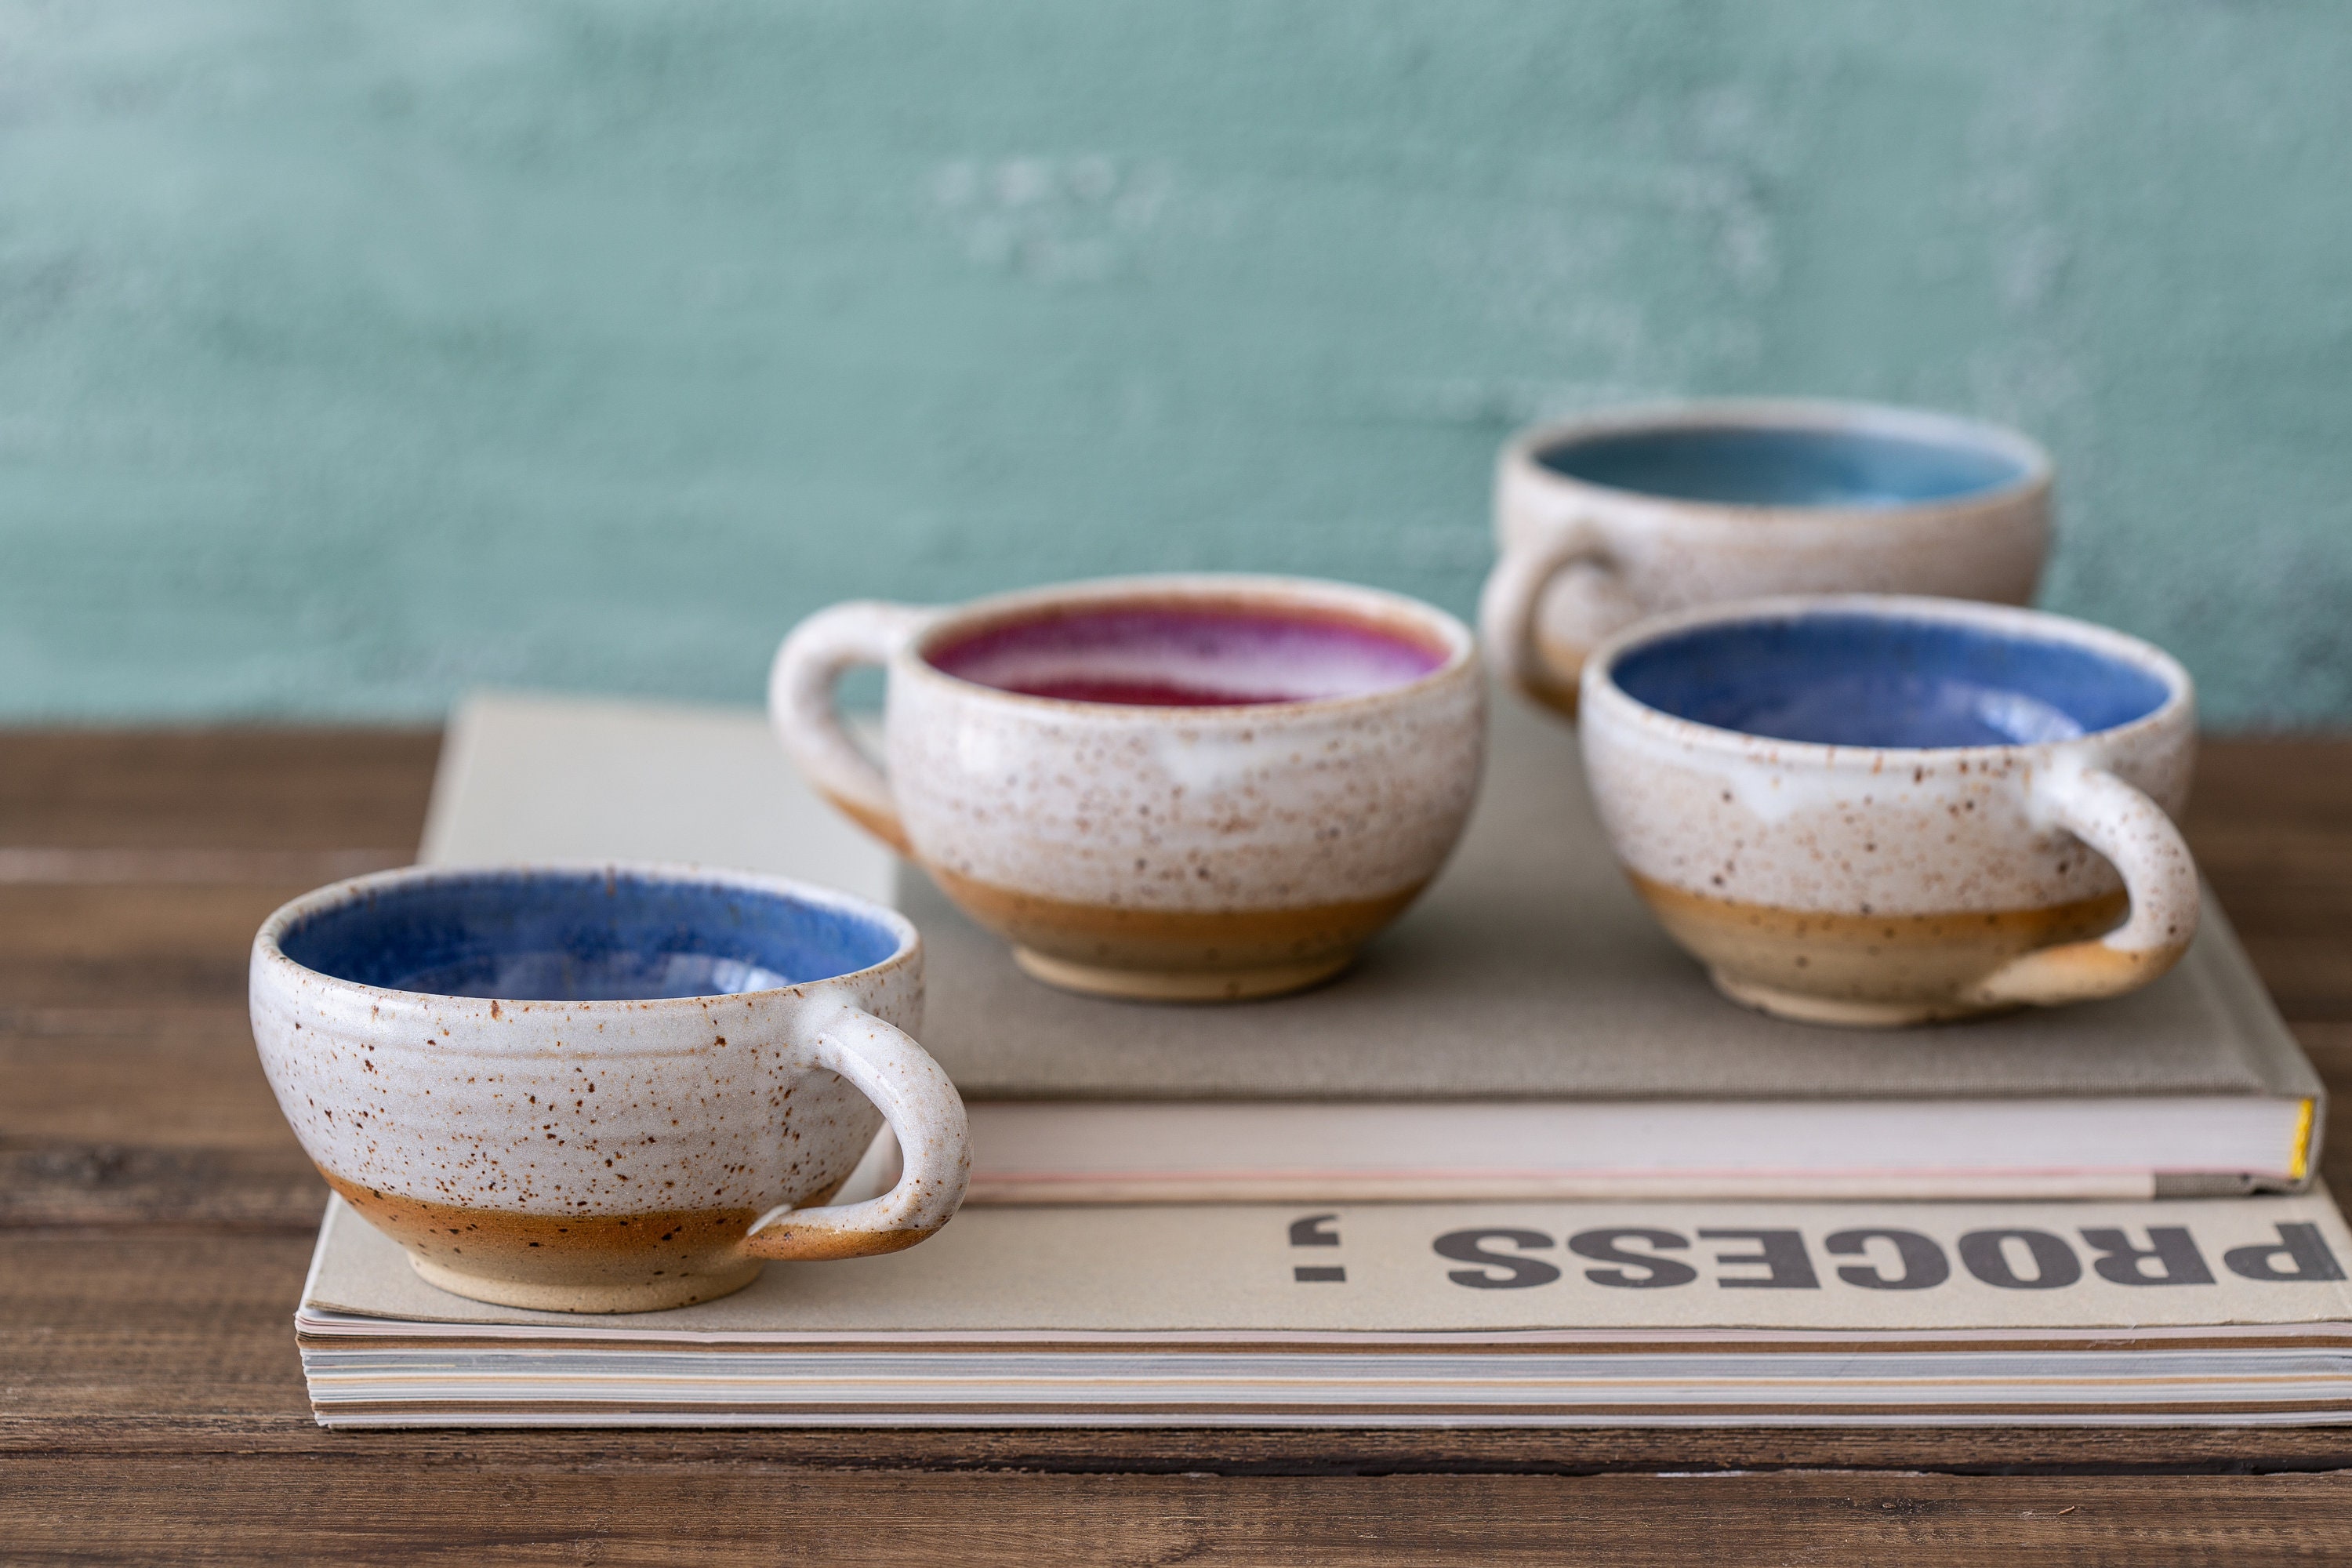 SET OF 4 Ceramic Espresso Cups With Saucer Handmade Pottery Organic  Tableware Unique Macchiato Cup With Saucer 